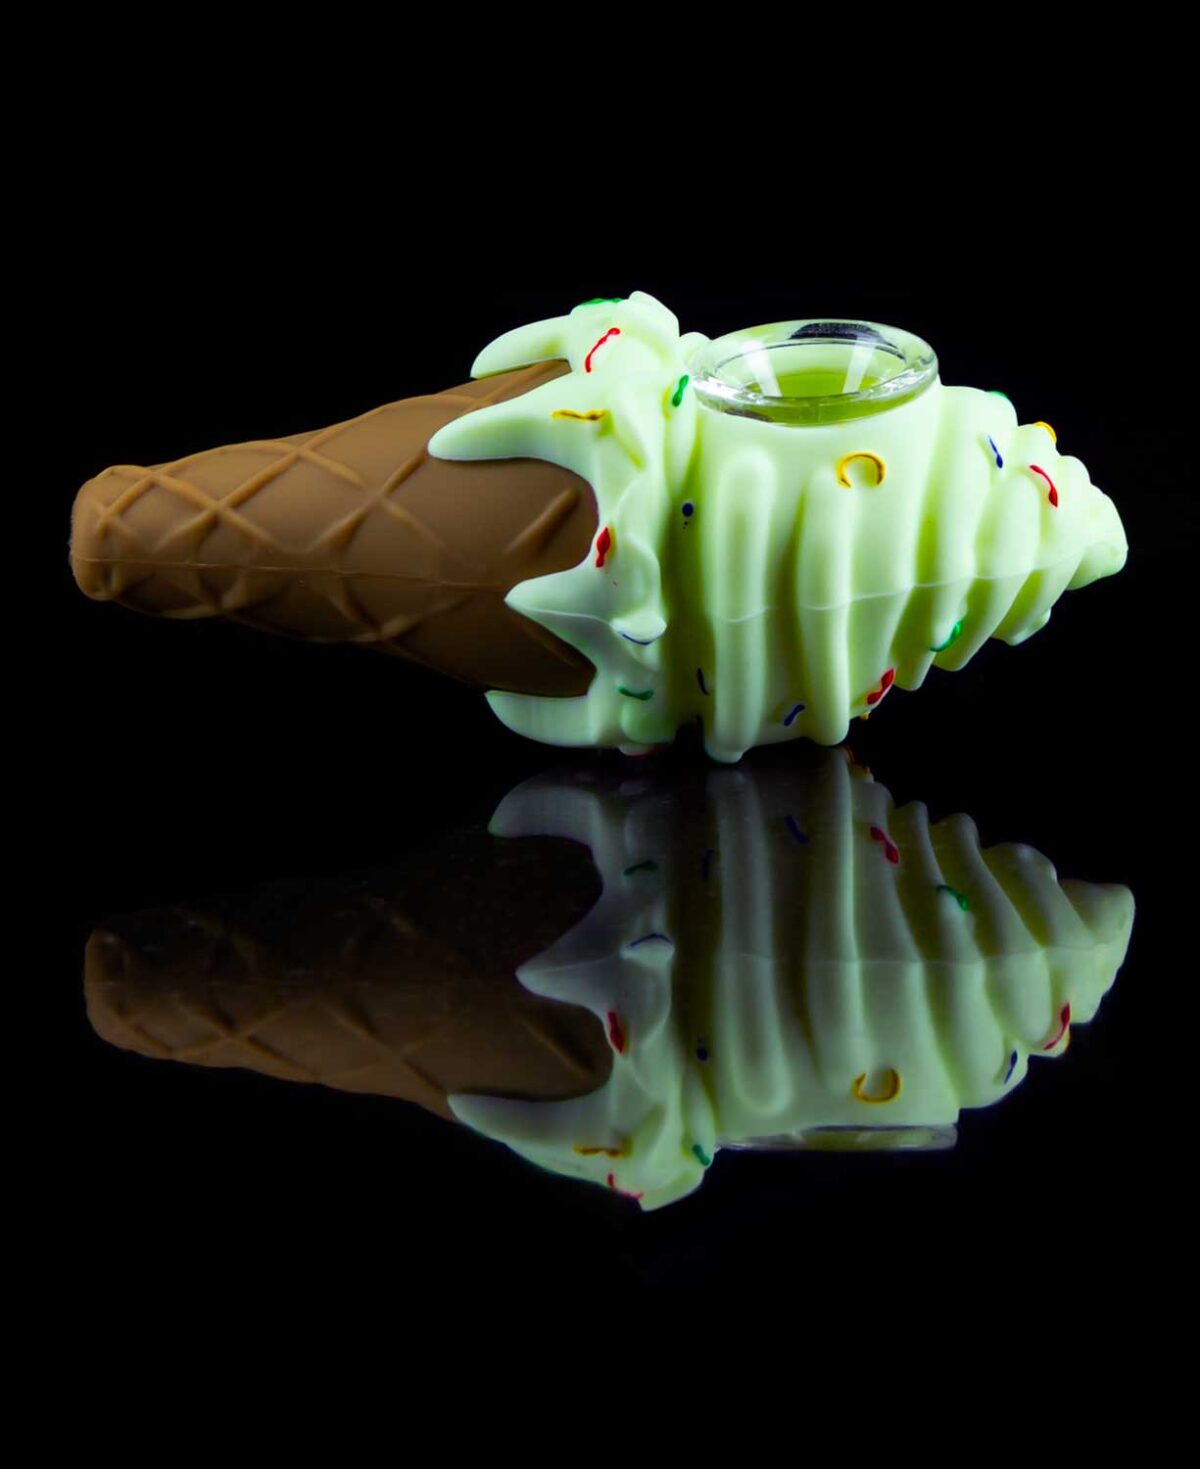 ice cream cone shaped pipe in vanilla cream color with sprinkles